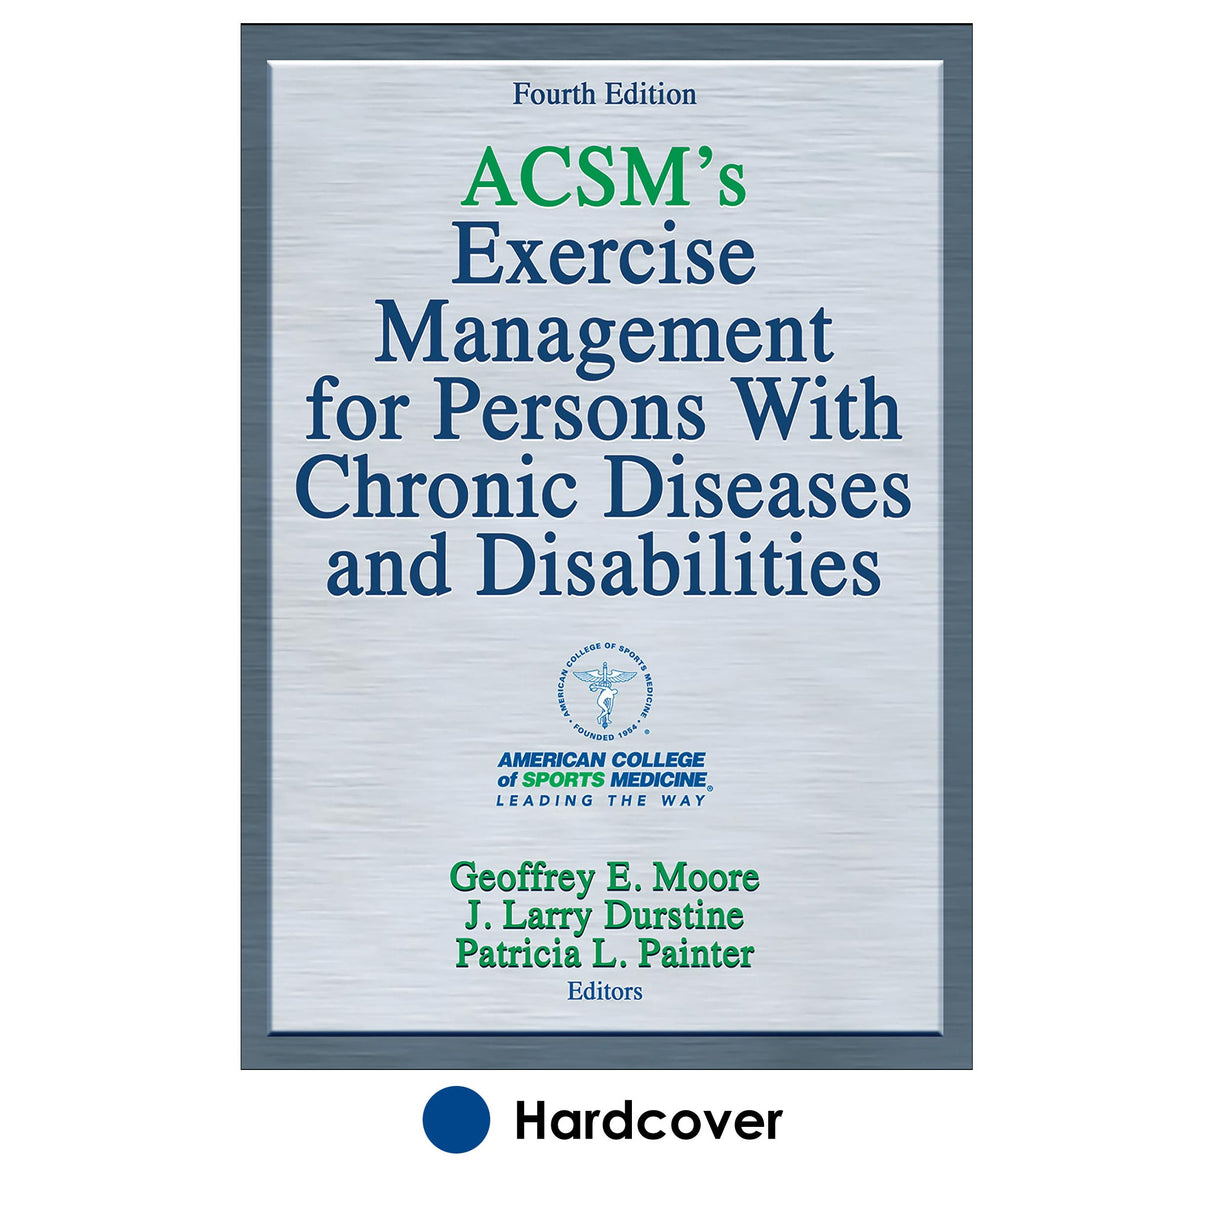 ACSM's Exercise Management for Persons with Chronic Diseases and Disabilities-4th